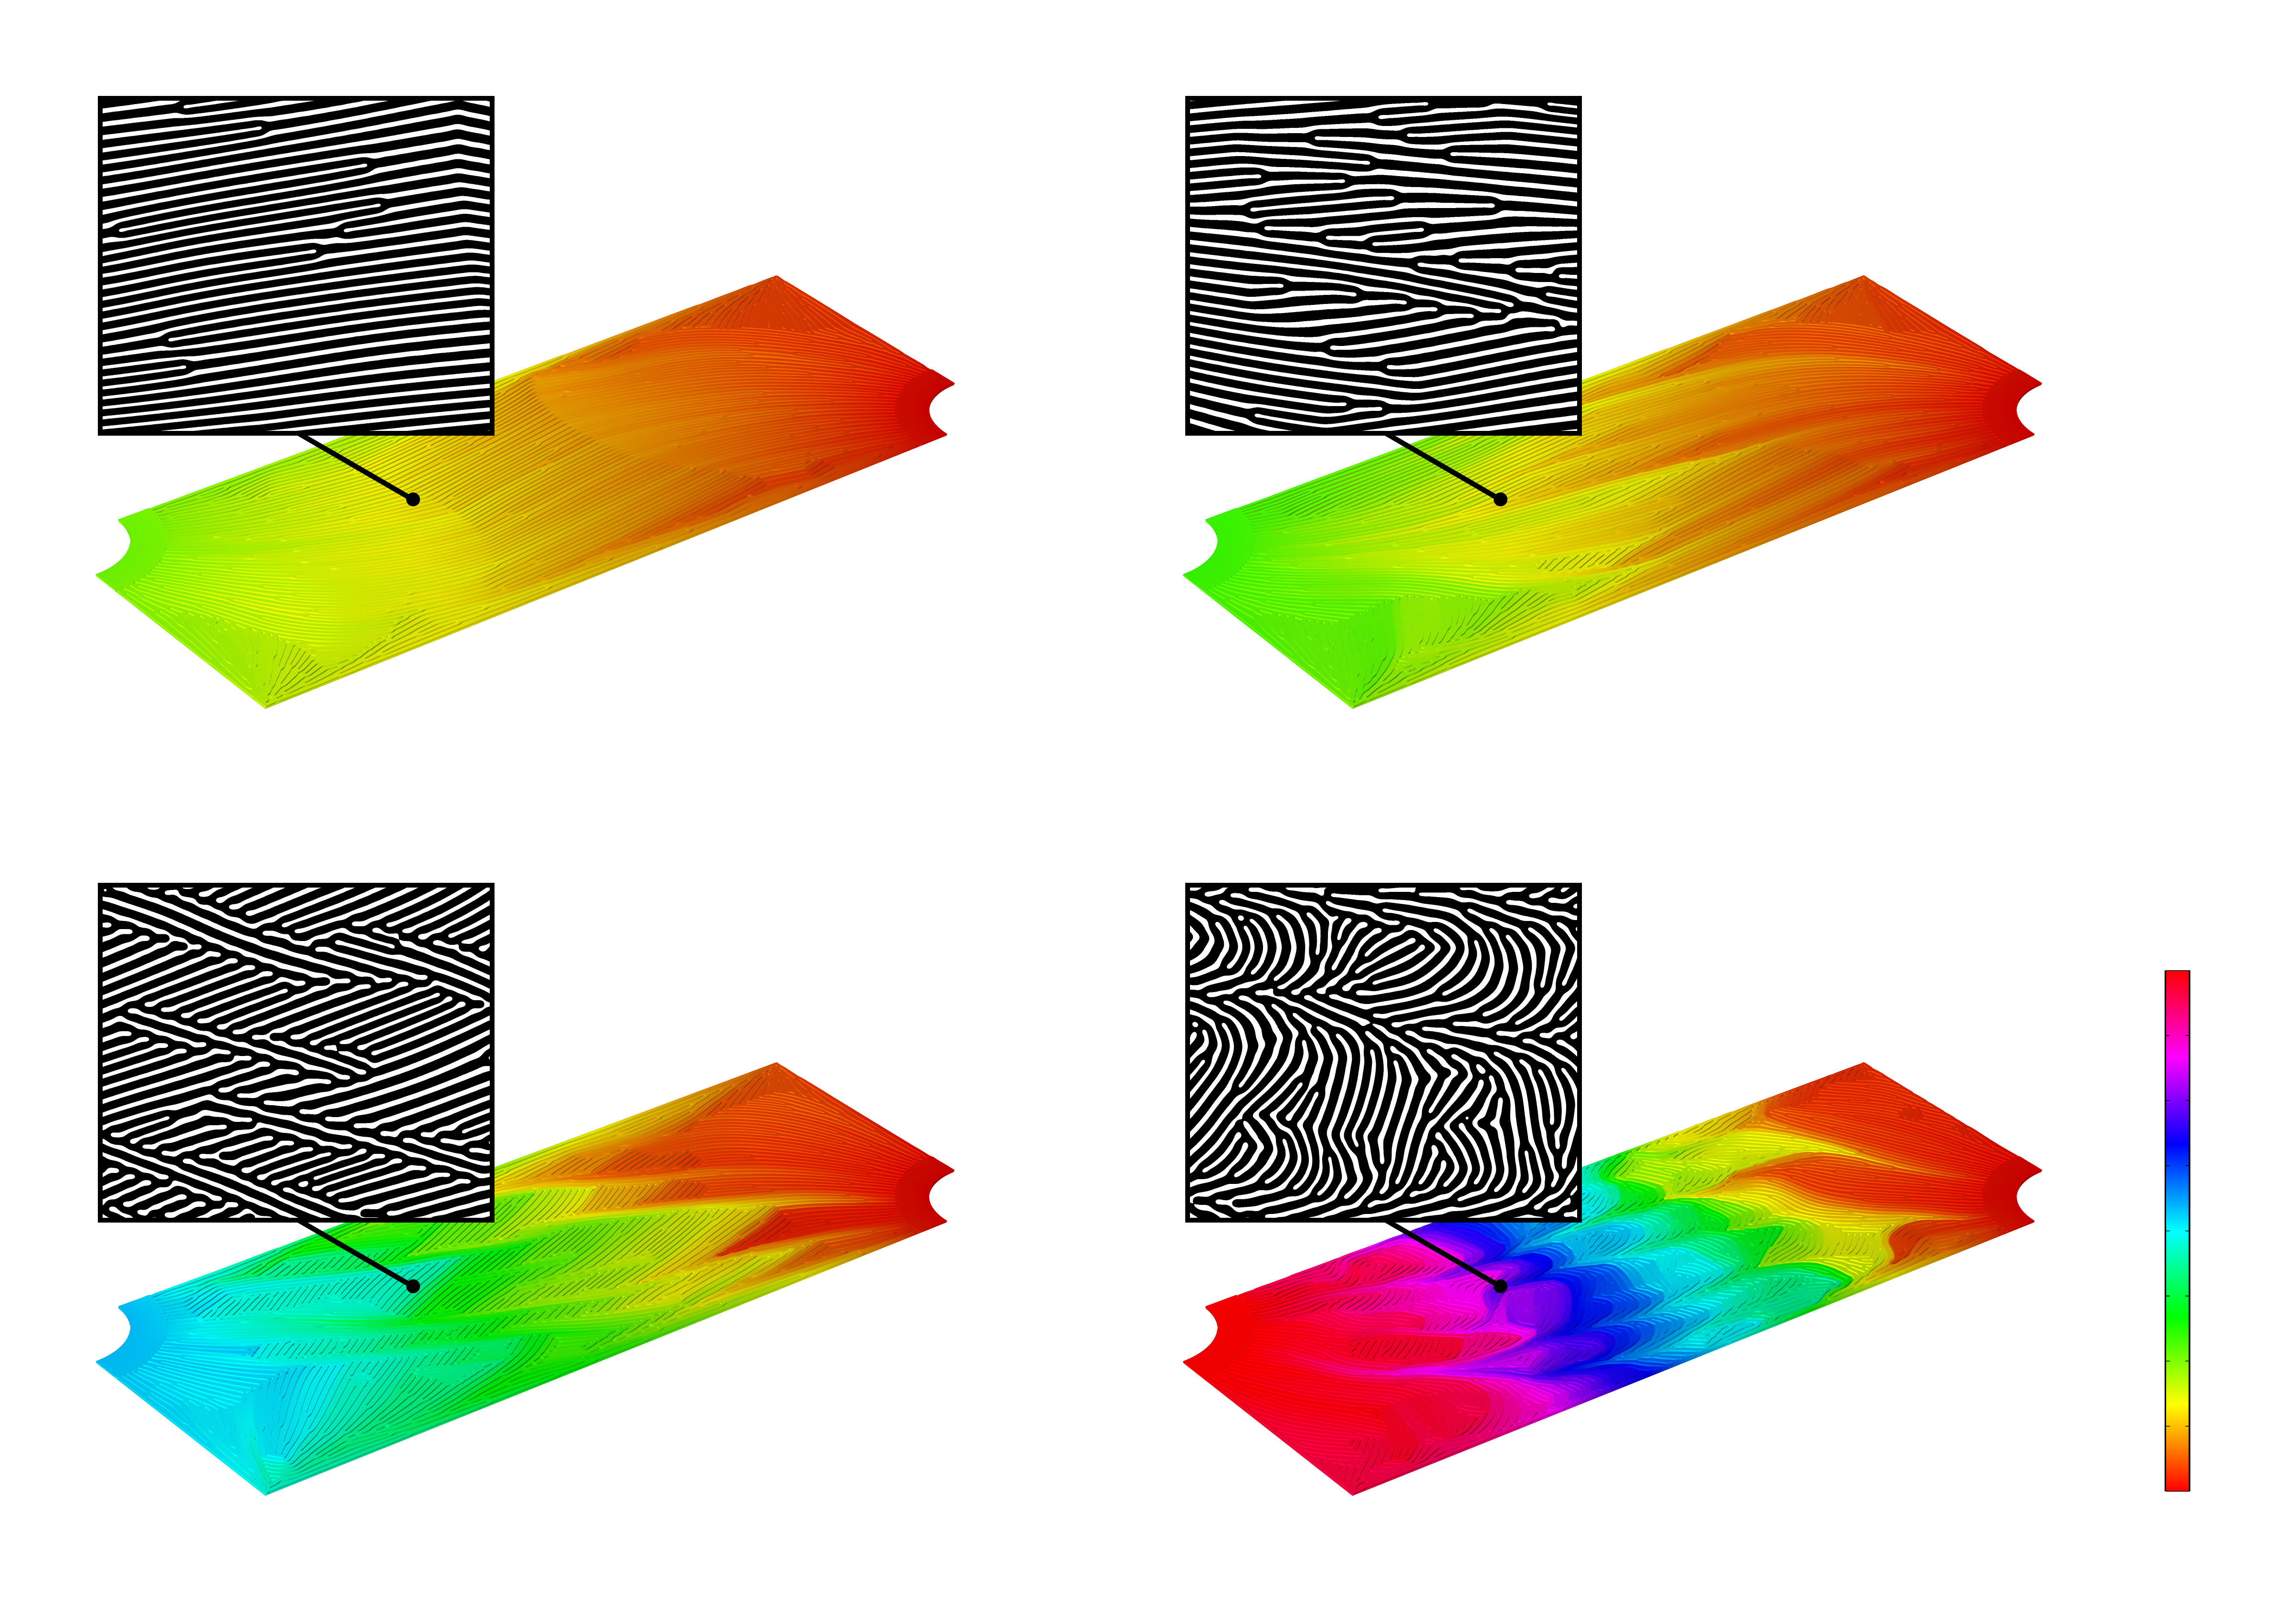 A 2 x 2 matrix of 3D simulation images that show the pressure distributions of four different microchannel designs in a rainbow color scale. A corresponding 2D black-and-white enlarged inset rendering of each of the microchannel designs appears above each simulation image.